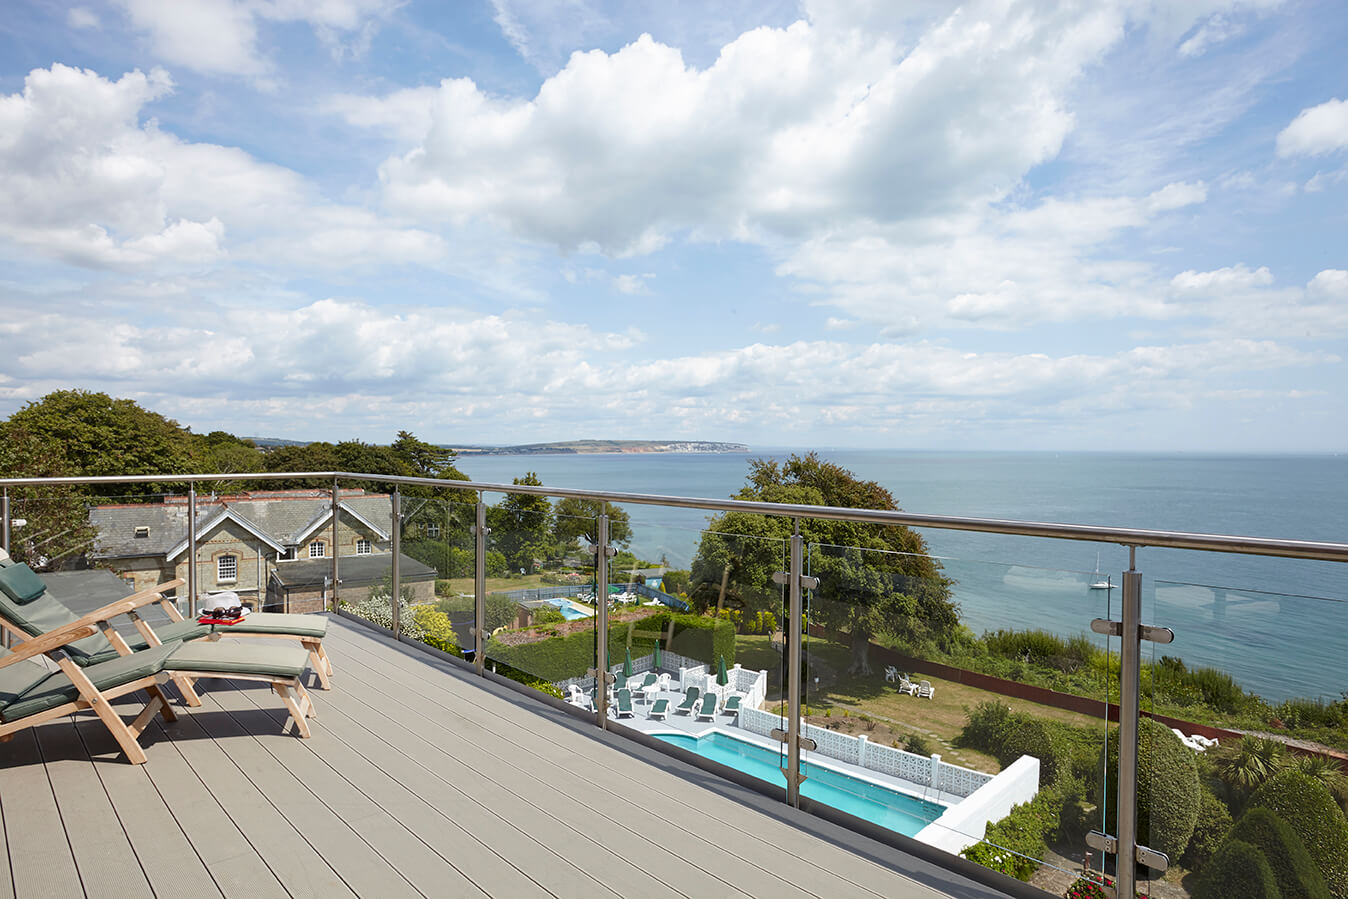 Executive Suite, Room 16, Spacious Balcony & Breathtaking Sea Views, Luccombe Hall Hotel, Isle of Wight